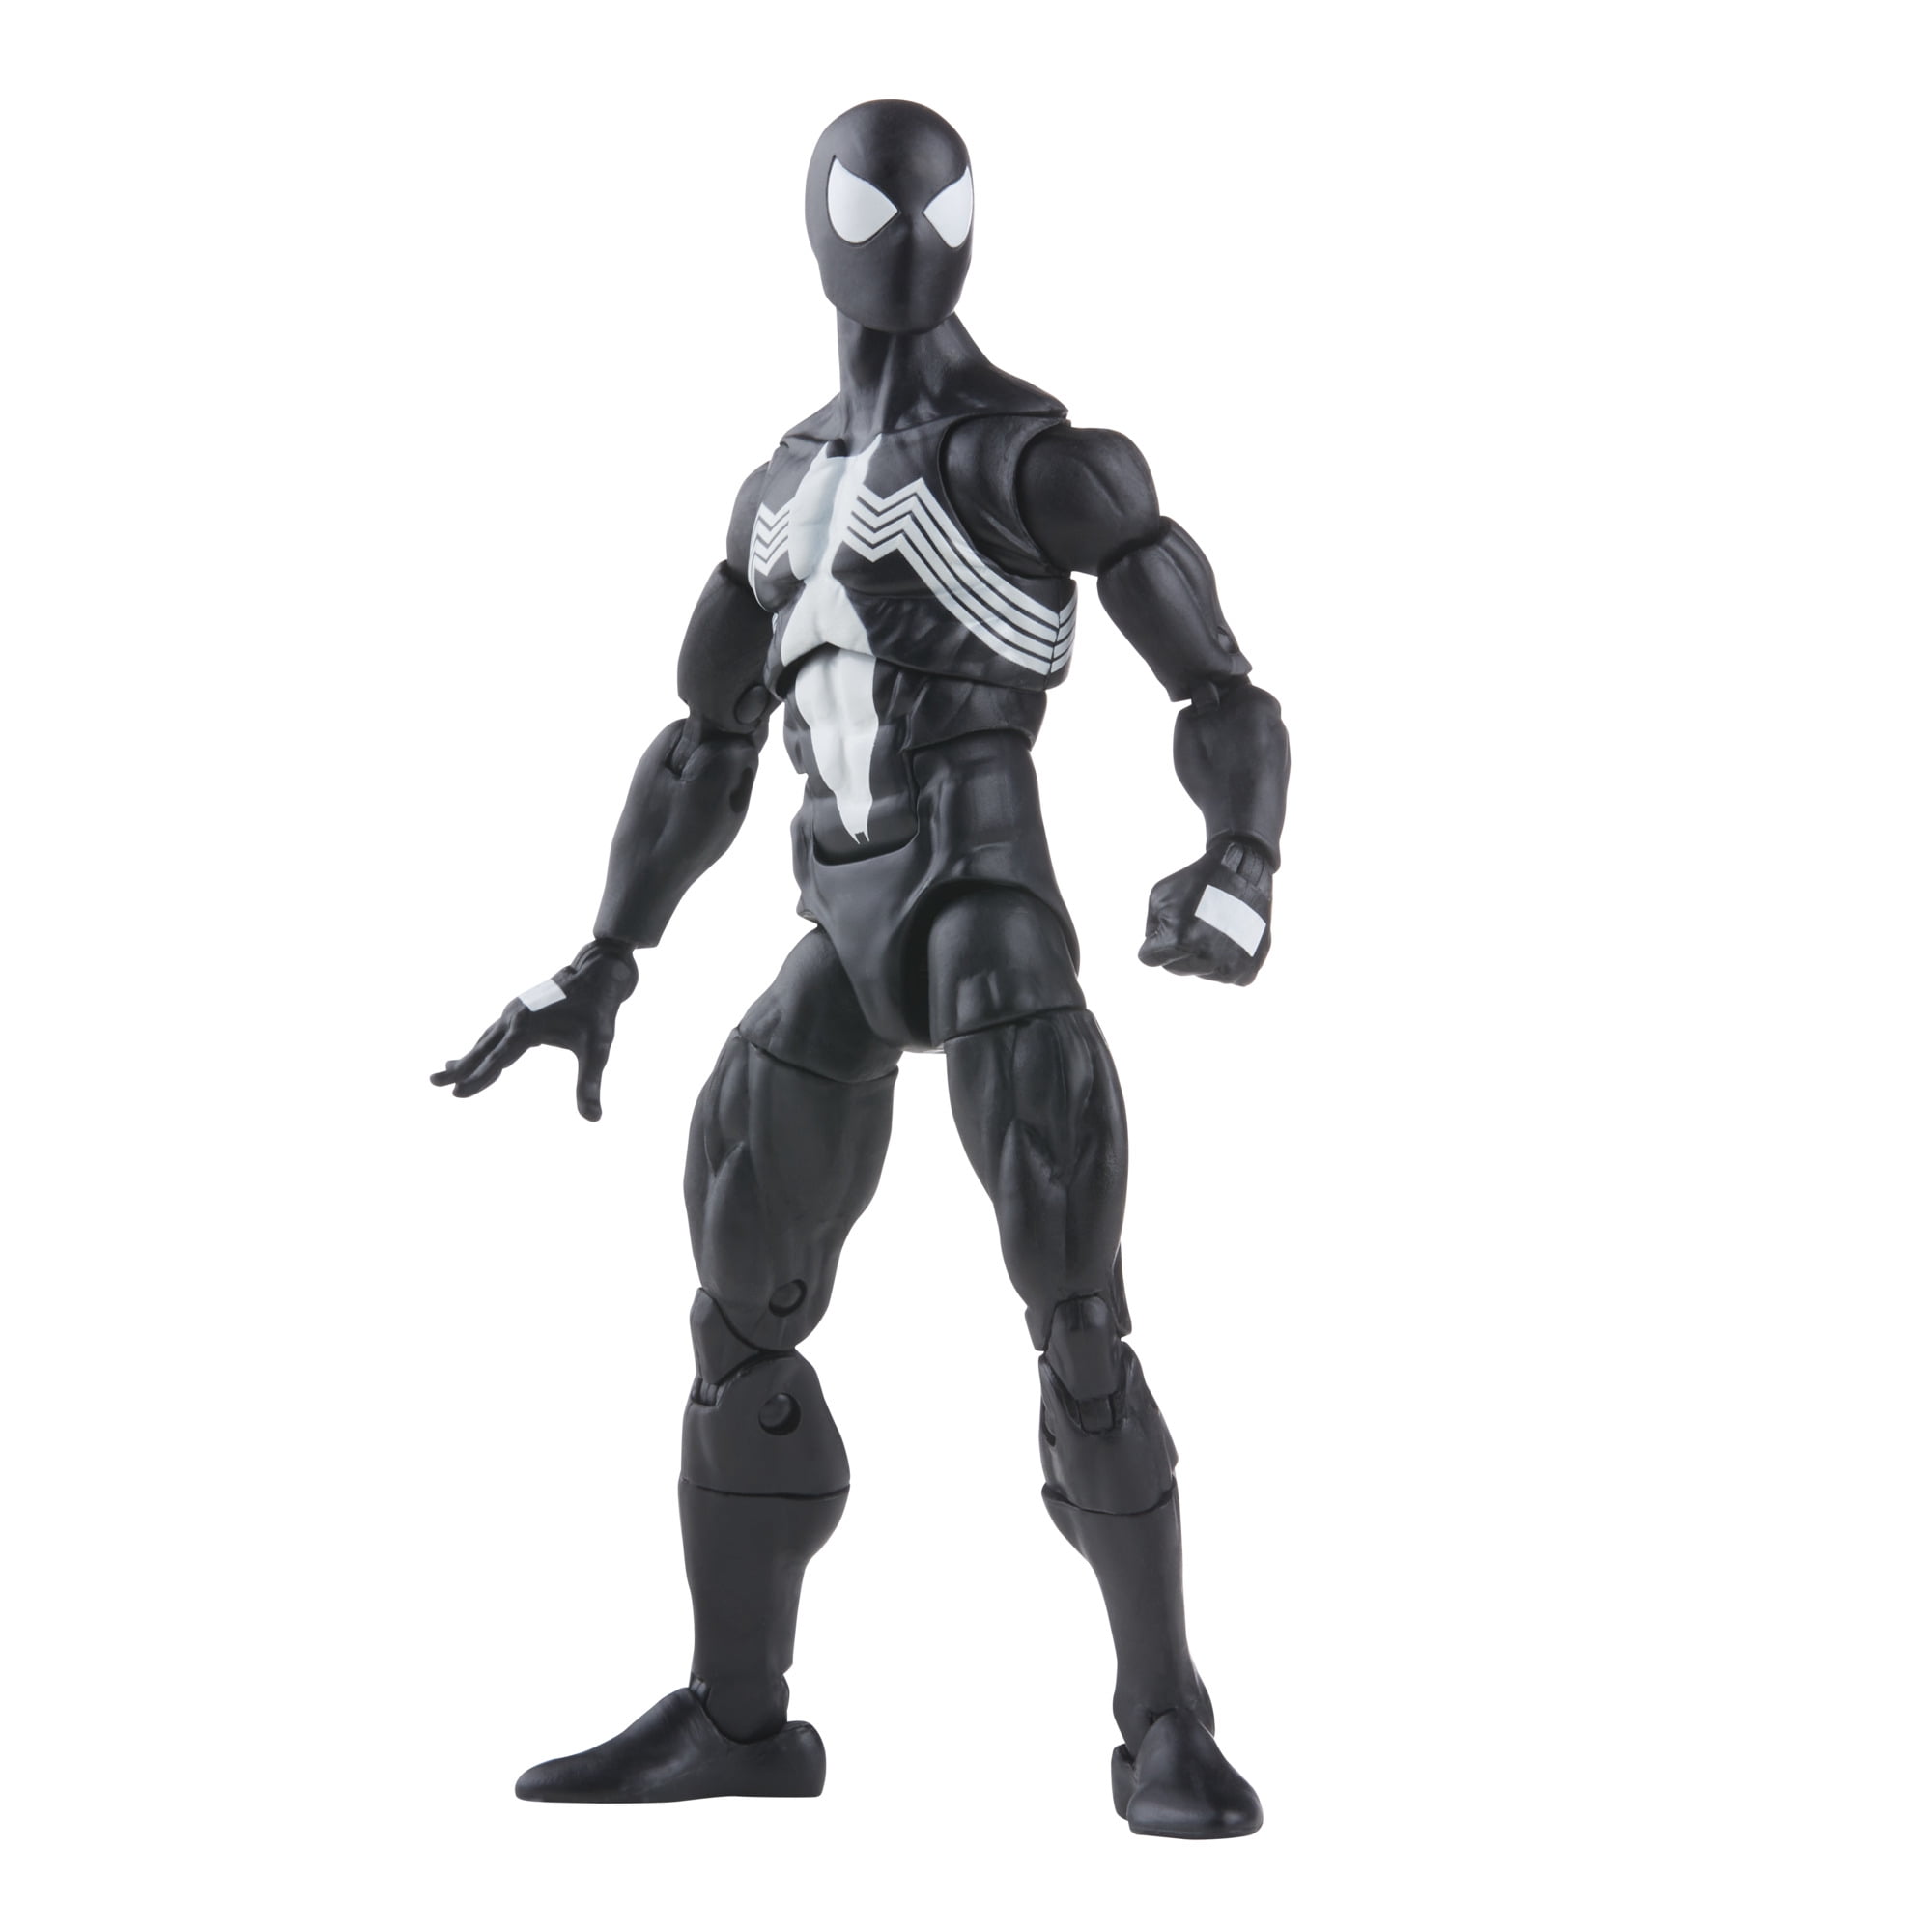 12 inch fully articulated figure HASBRO Marvel Legends "SPIDERMAN" 